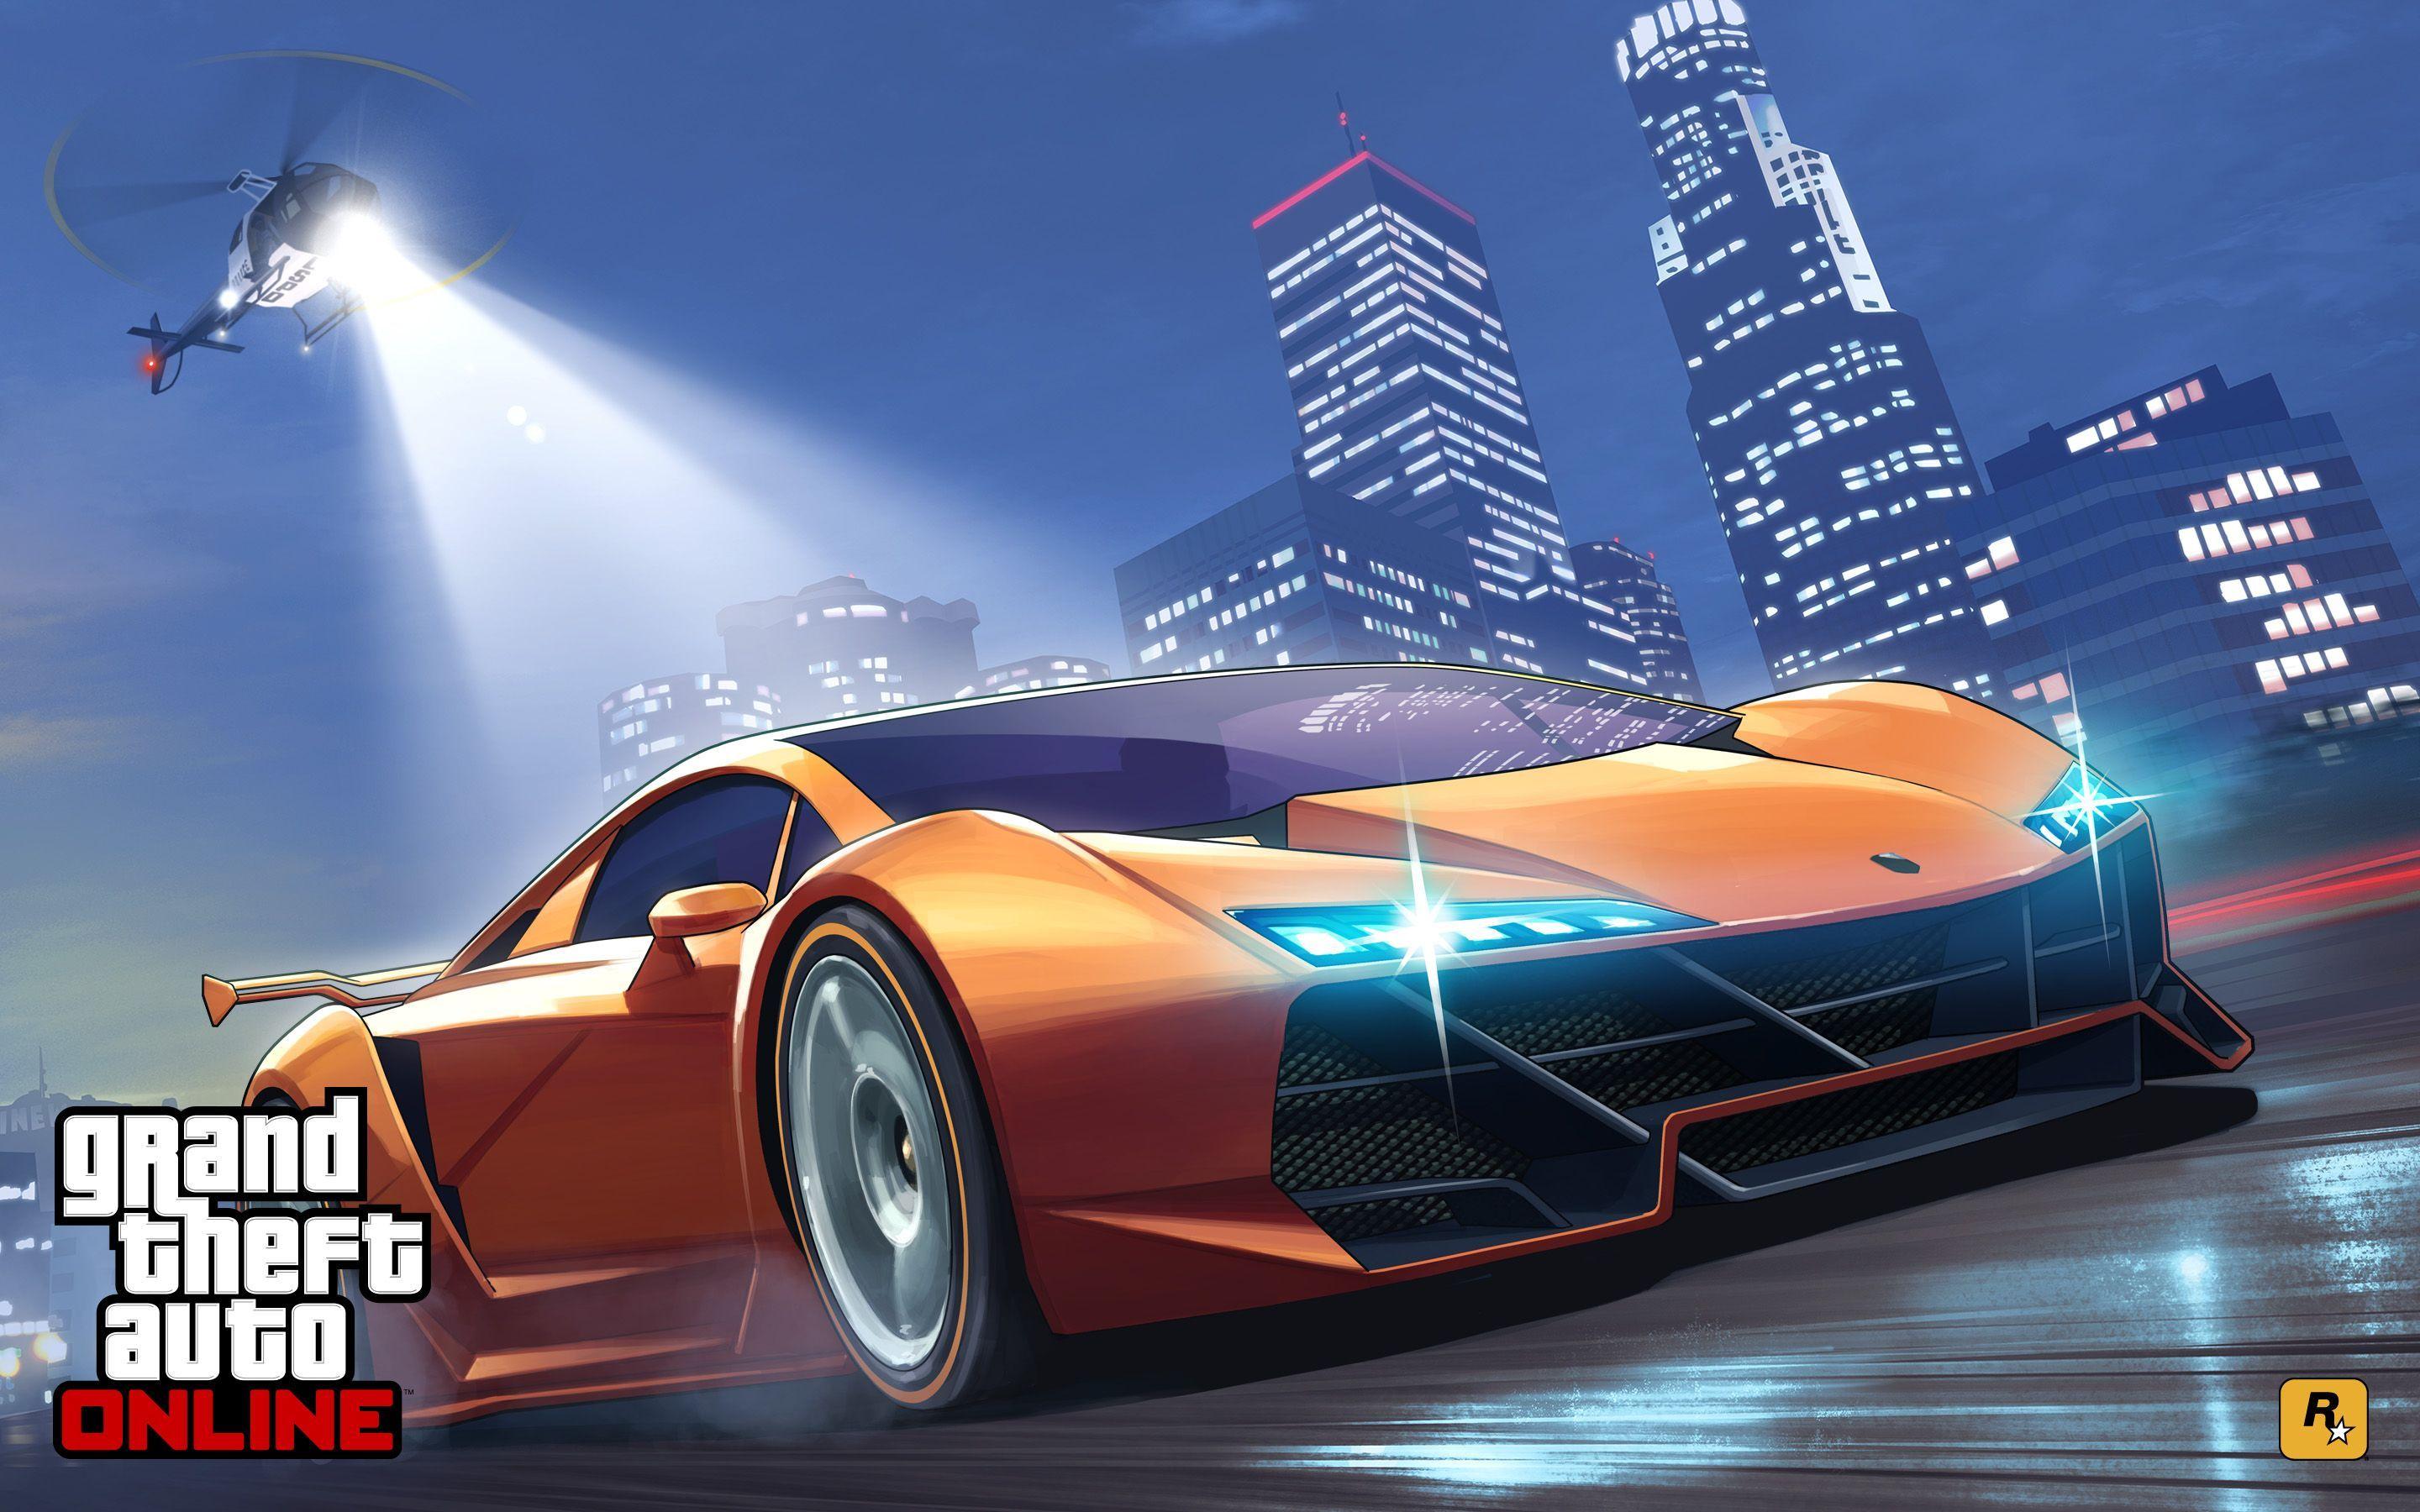 Grand Theft Auto Online 2015. Exclusive Wallpaper Wallpaper. Grand theft auto, Grand theft auto series, Fast cars